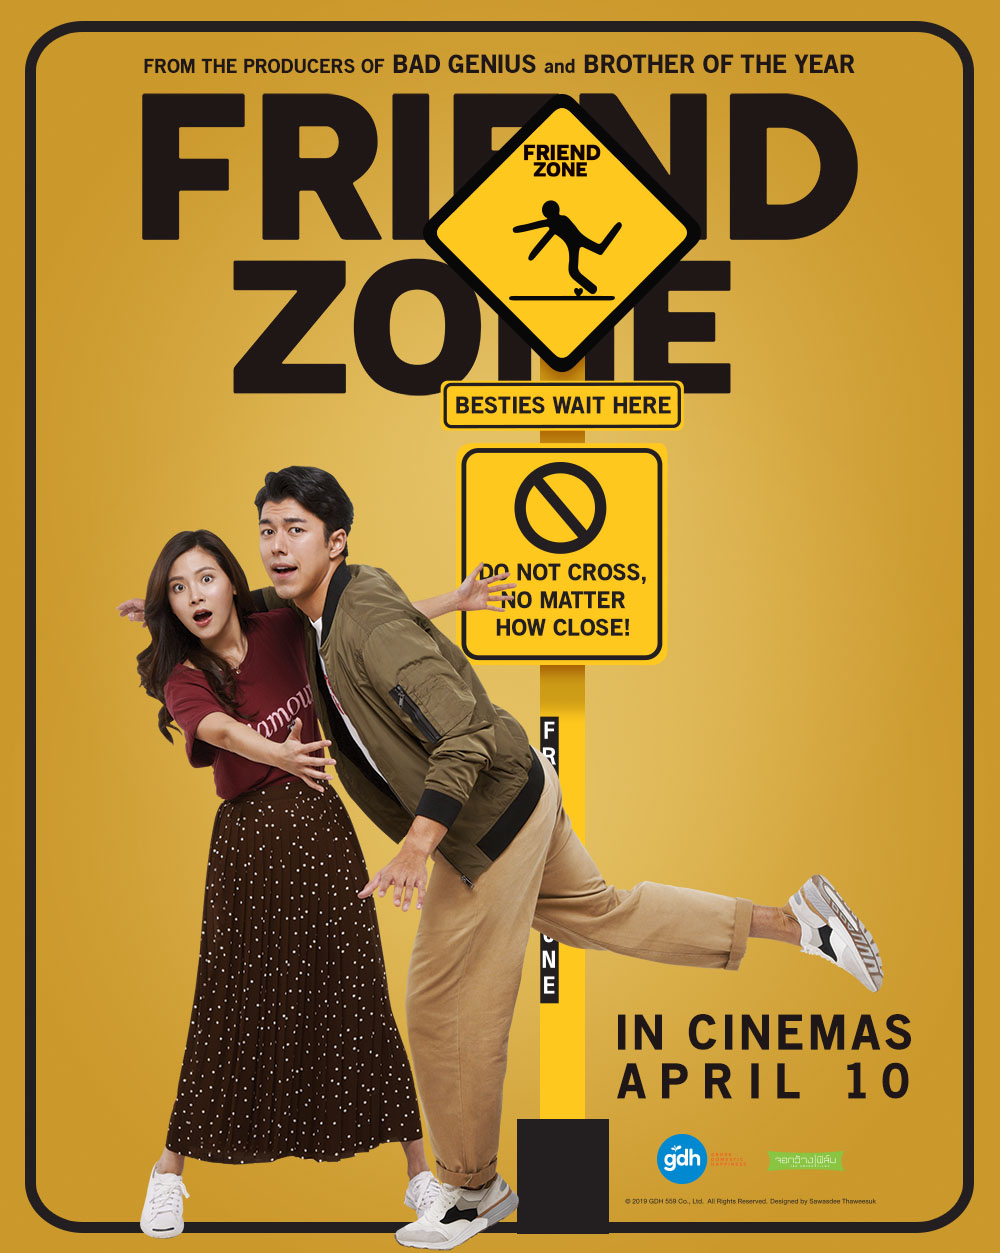 Highest Grossing Thai Film of 2019, Friend Zone, to Hit ...